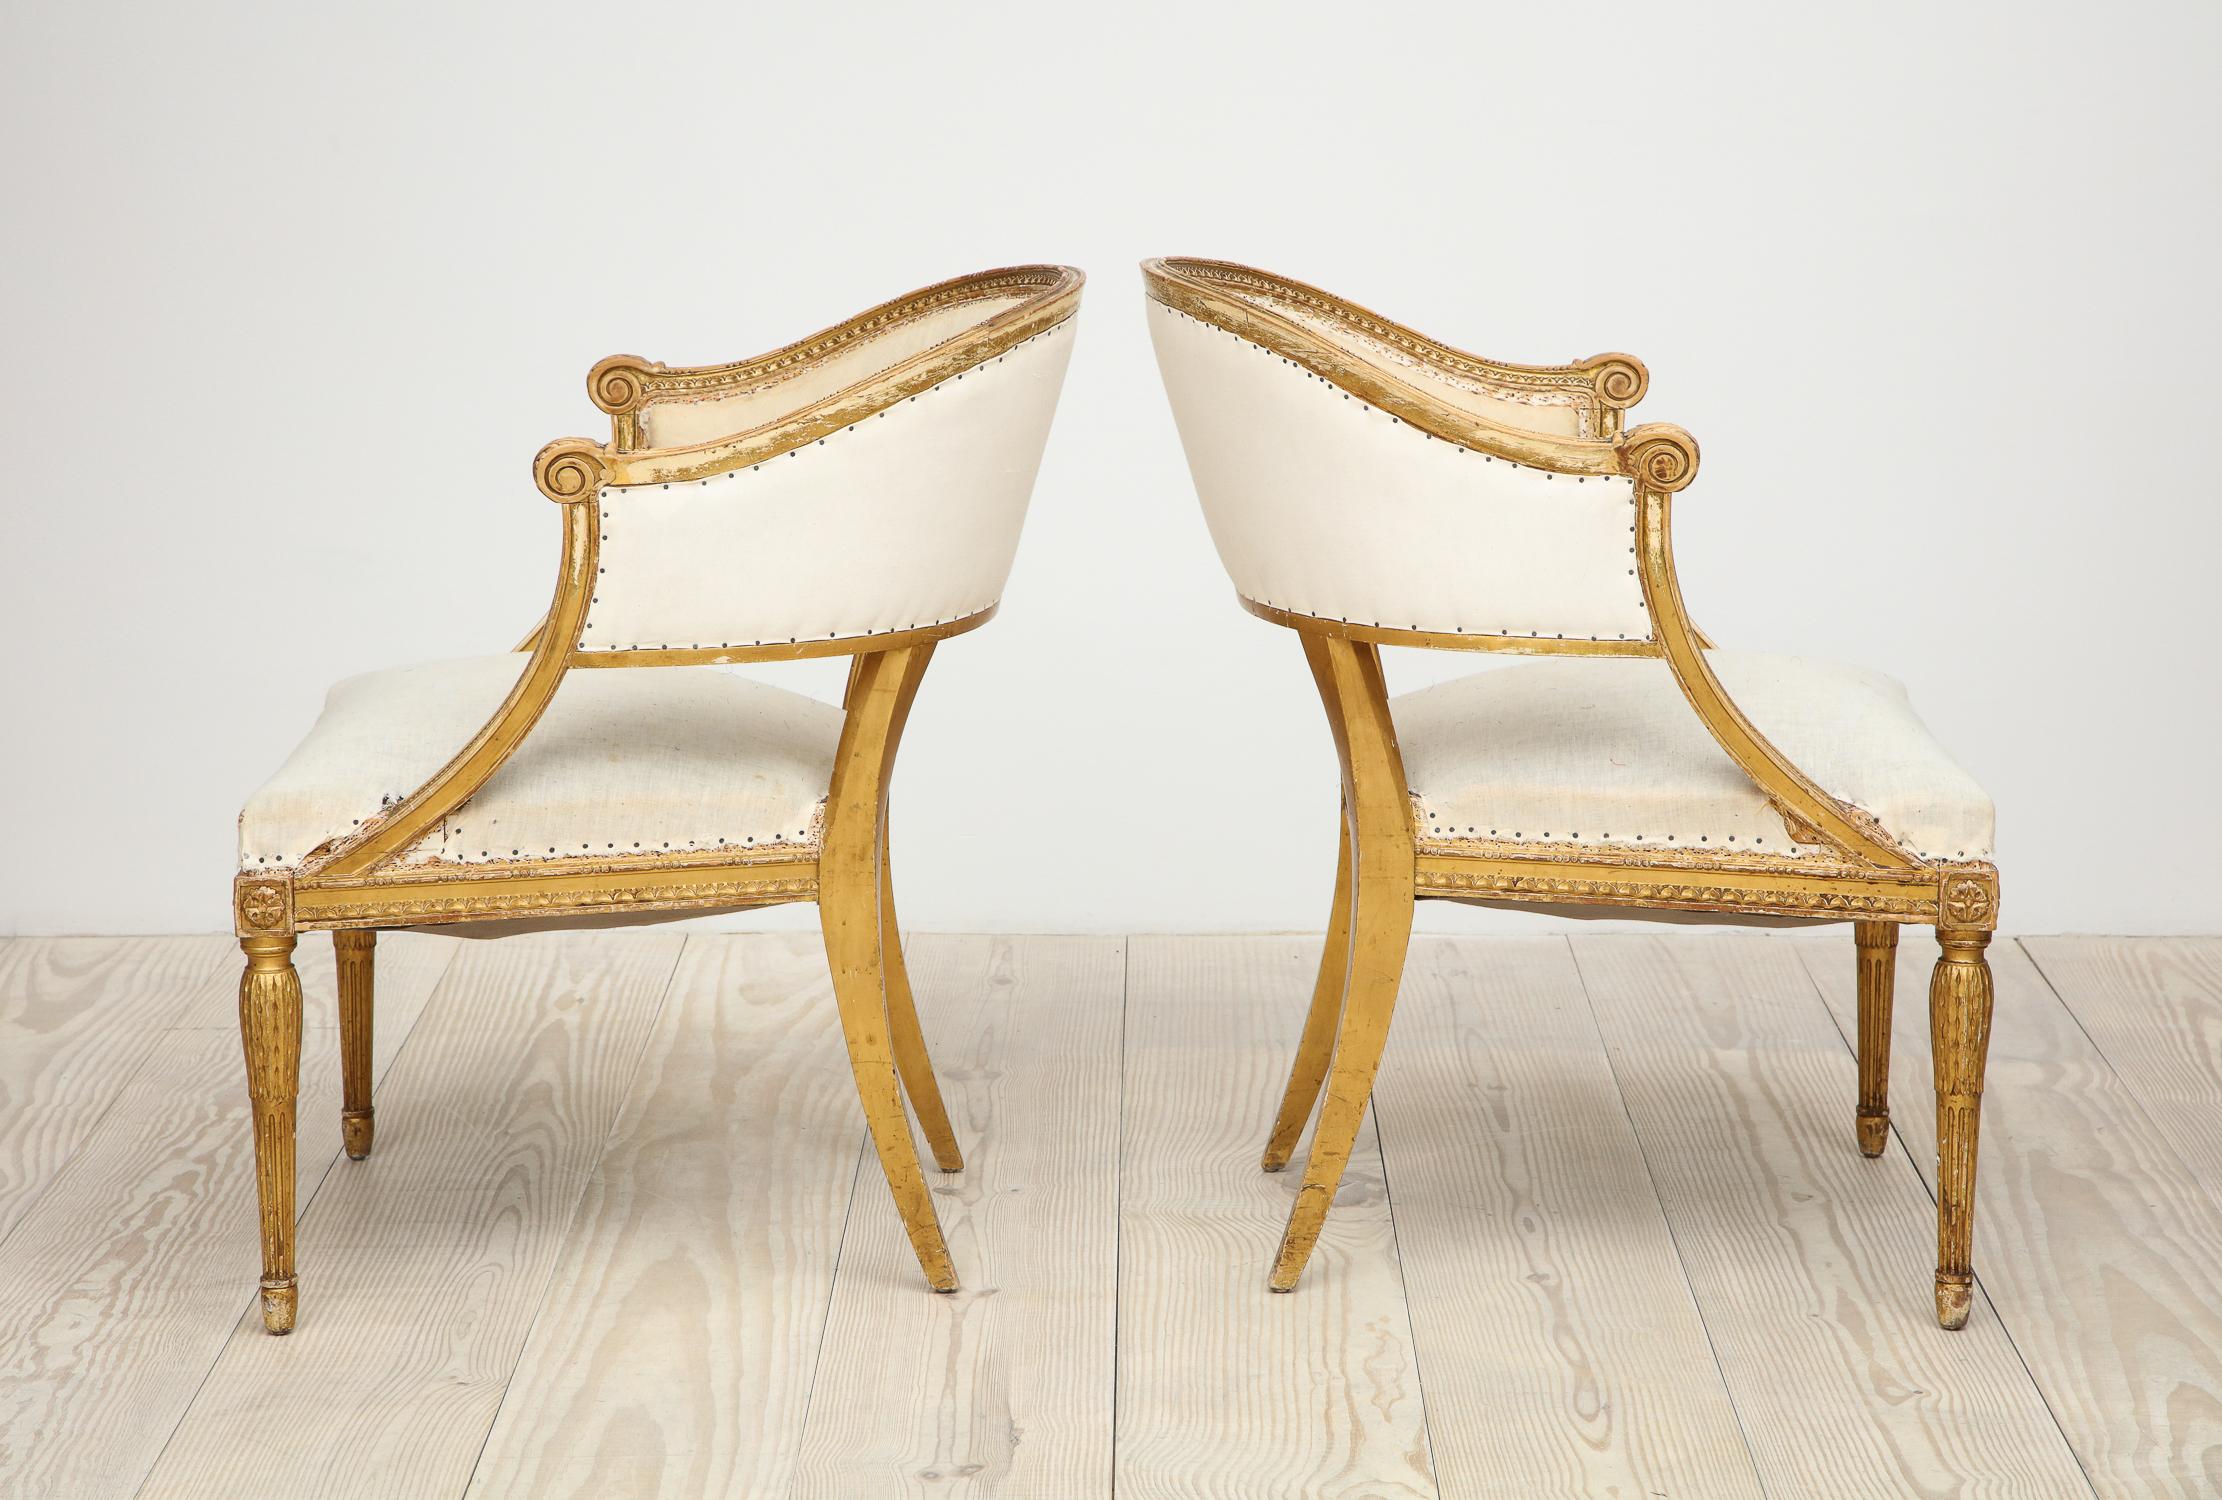 18th Century and Earlier 18th Century Giltwood Gustavian Bucket Chairs, Set of 4, Sweden, Circa 1790-1800 For Sale